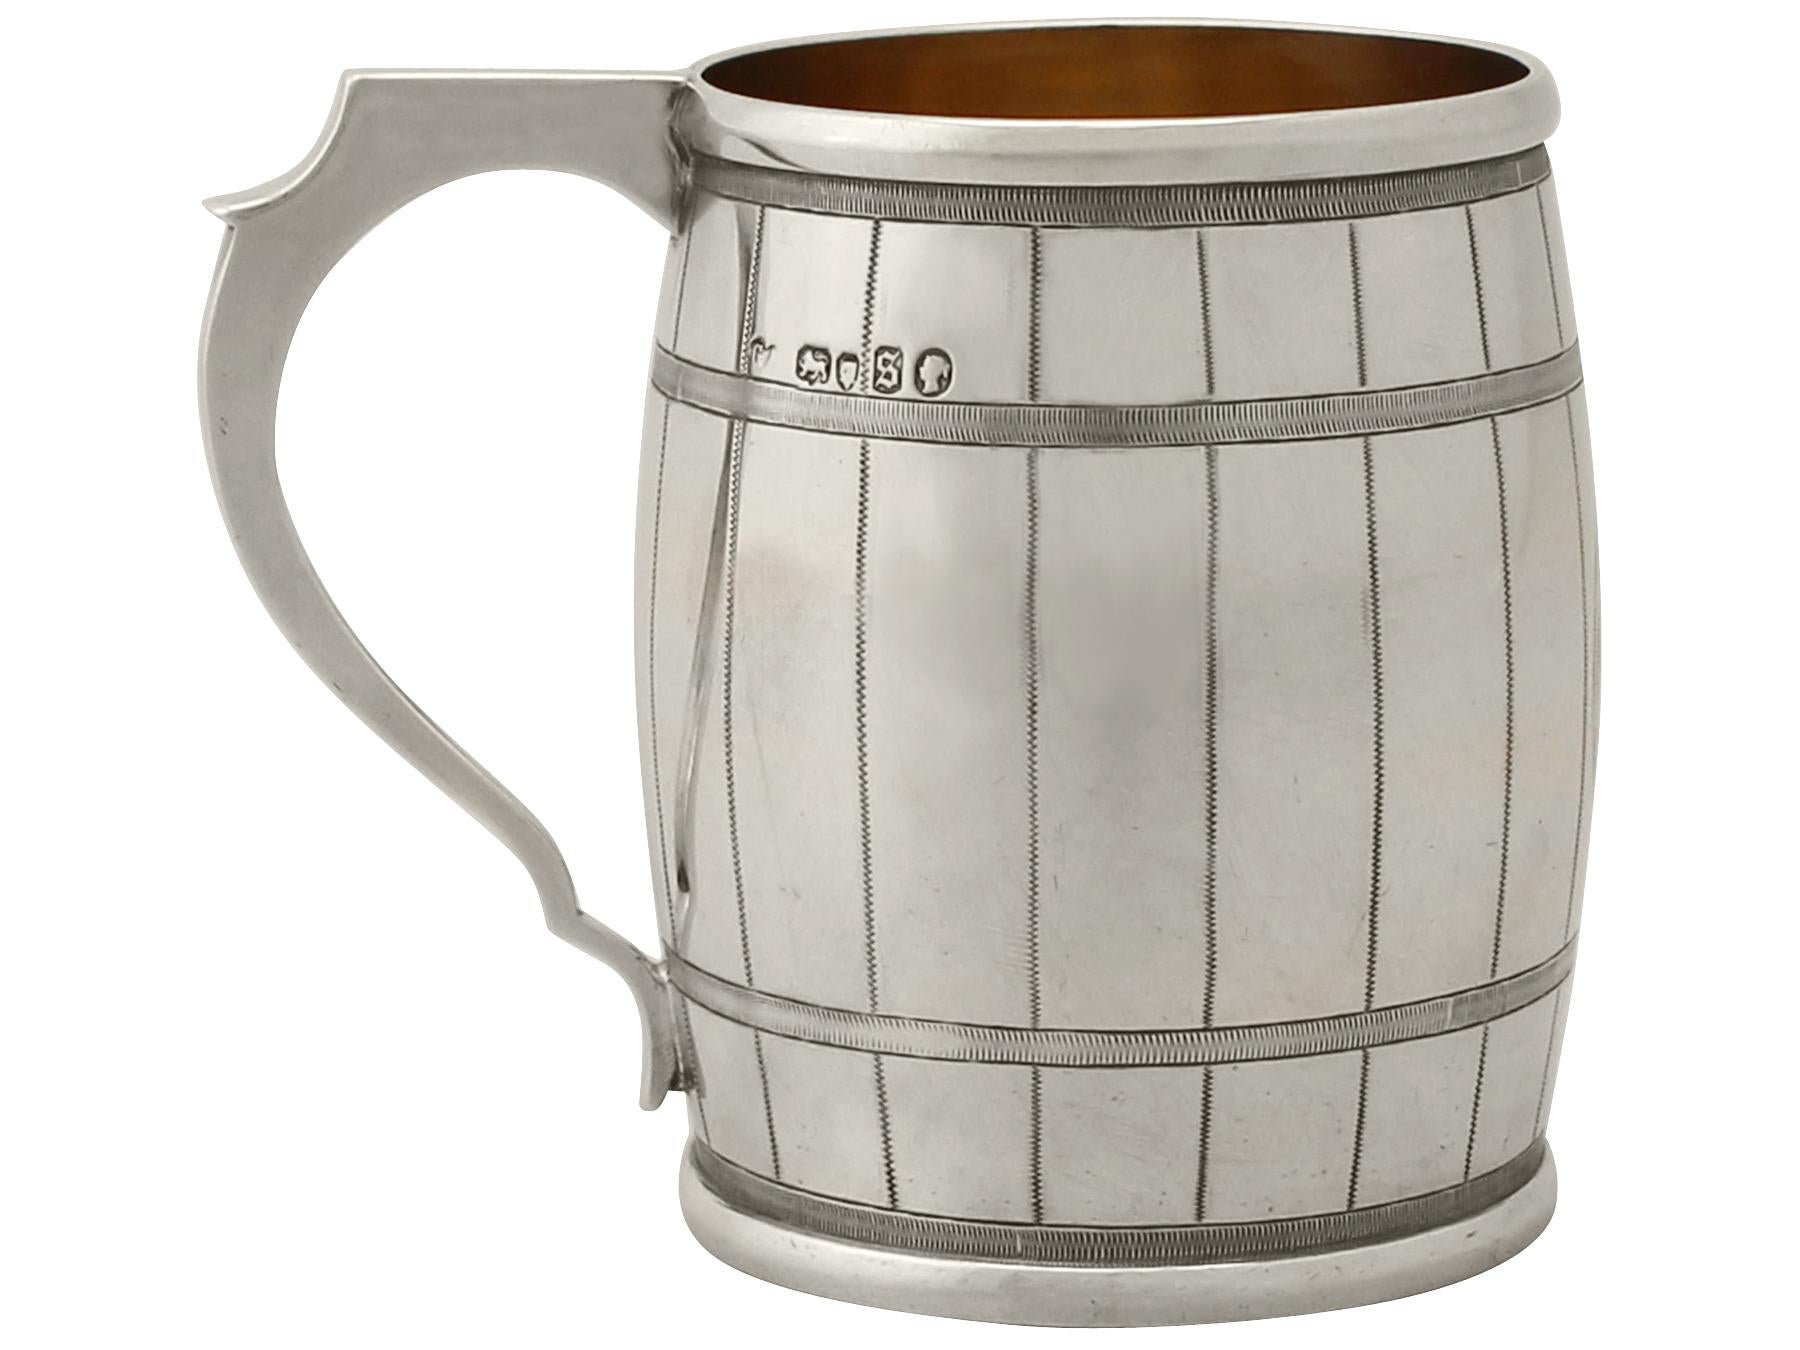 An exceptional, fine and impressive antique Victorian English sterling silver christening mug in the form of a barrel, made by George Adams; an addition to our silver christening gifts collection

This exceptional antique Victorian sterling silver